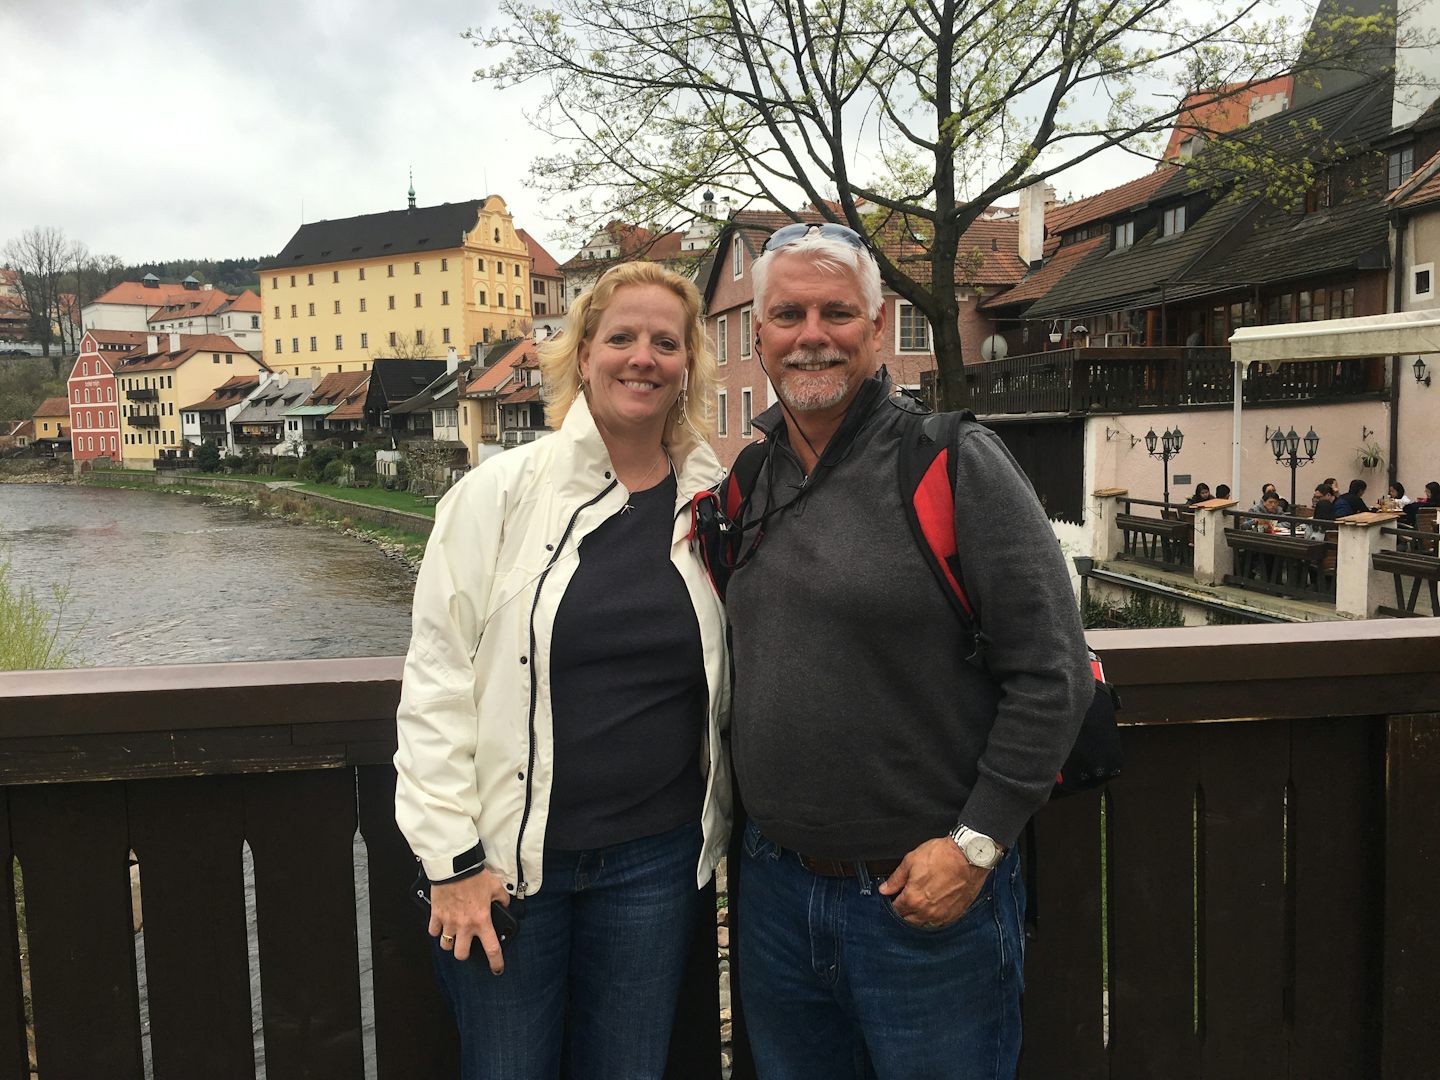 Excursion to Cesky Krumlov.  One of our favorites trips of the cruuise